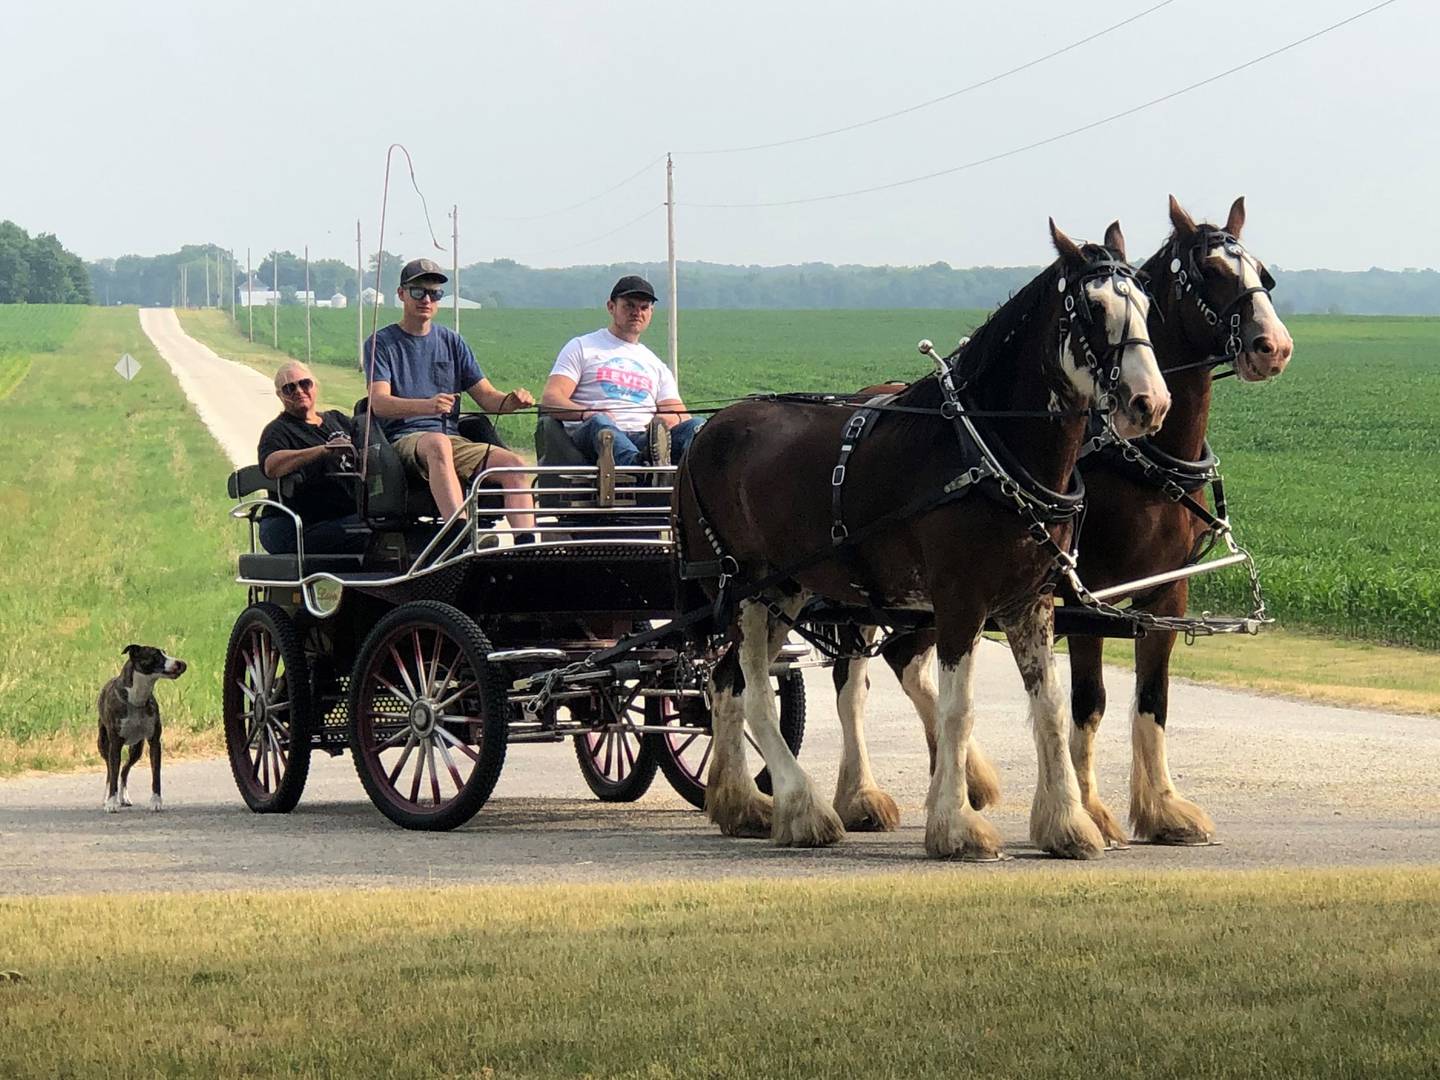 “Rick’s Family Team” — Nan Reynolds: “Our neighbor captured this moment as we drove by their farm. Great day for a family outing.”